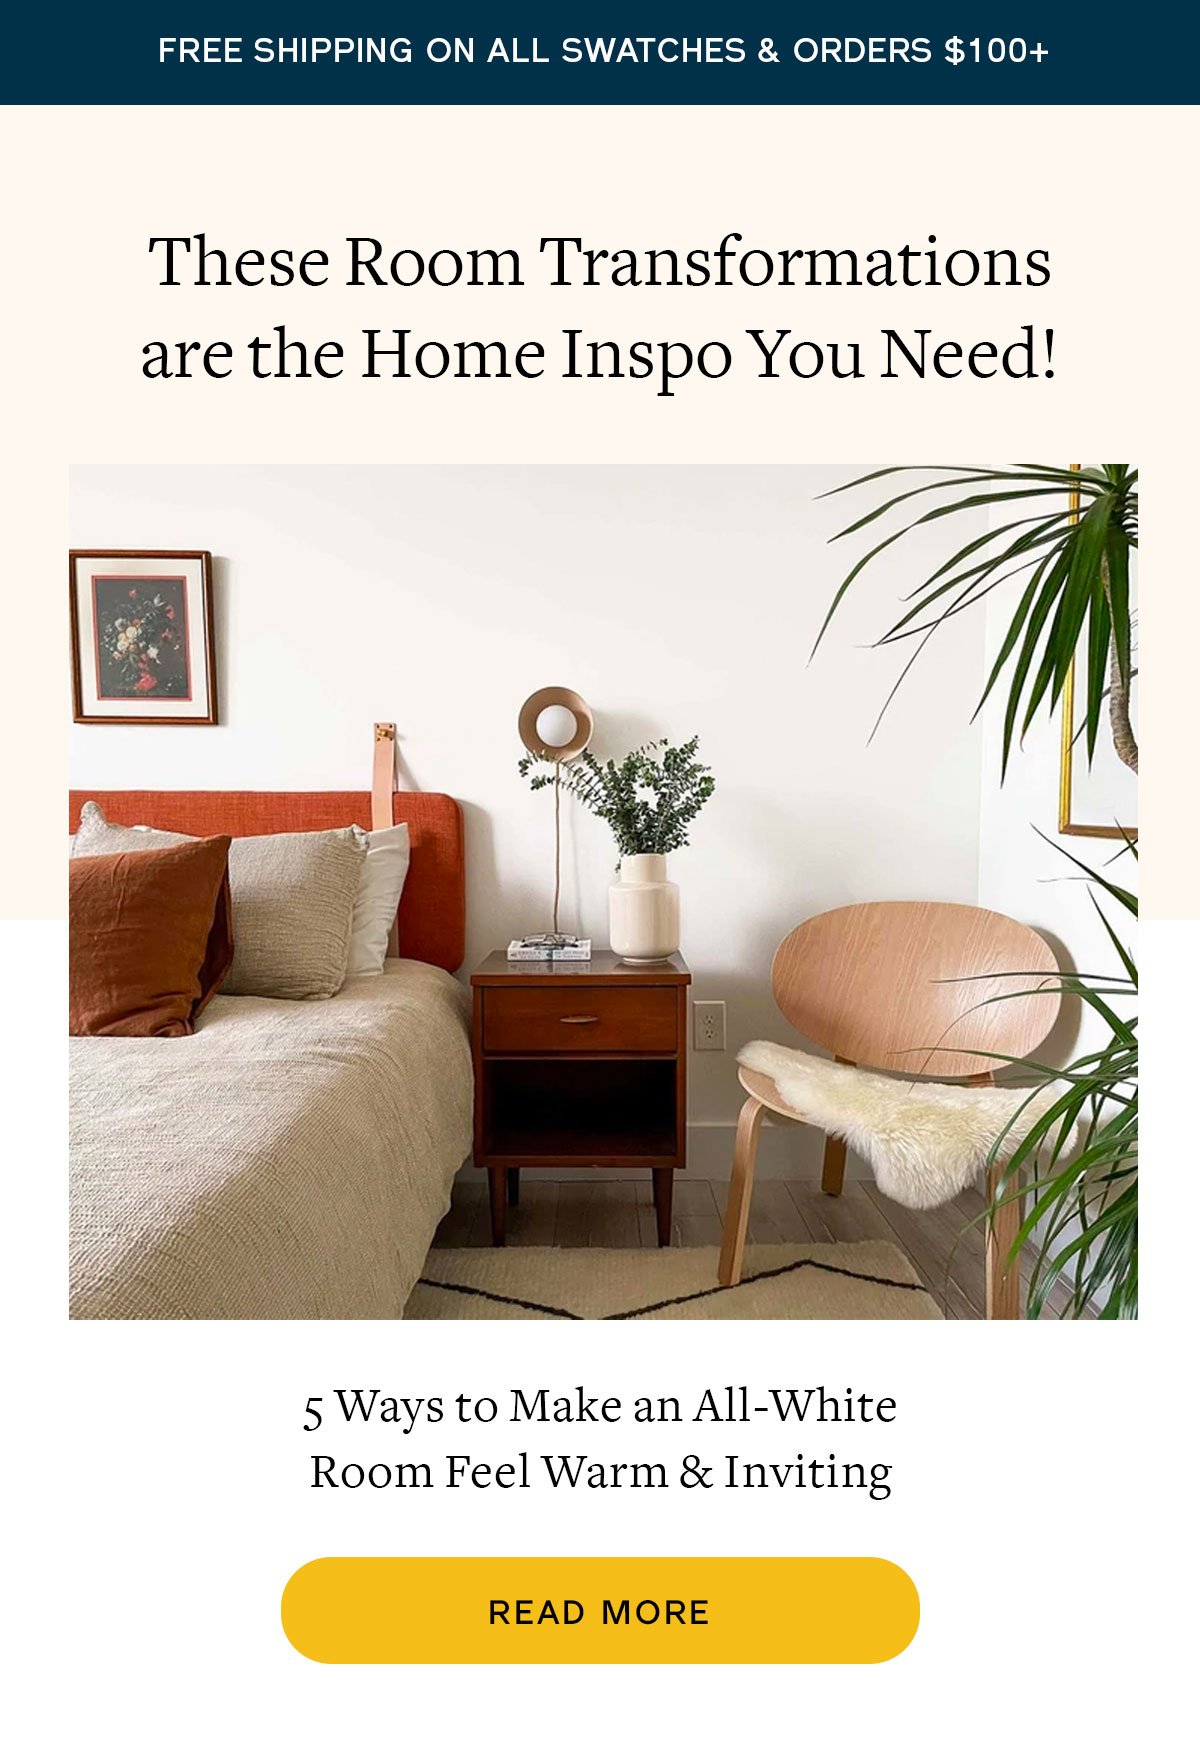 Blog: 5 Ways to Make an All-White Room Feel Warm and Inviting